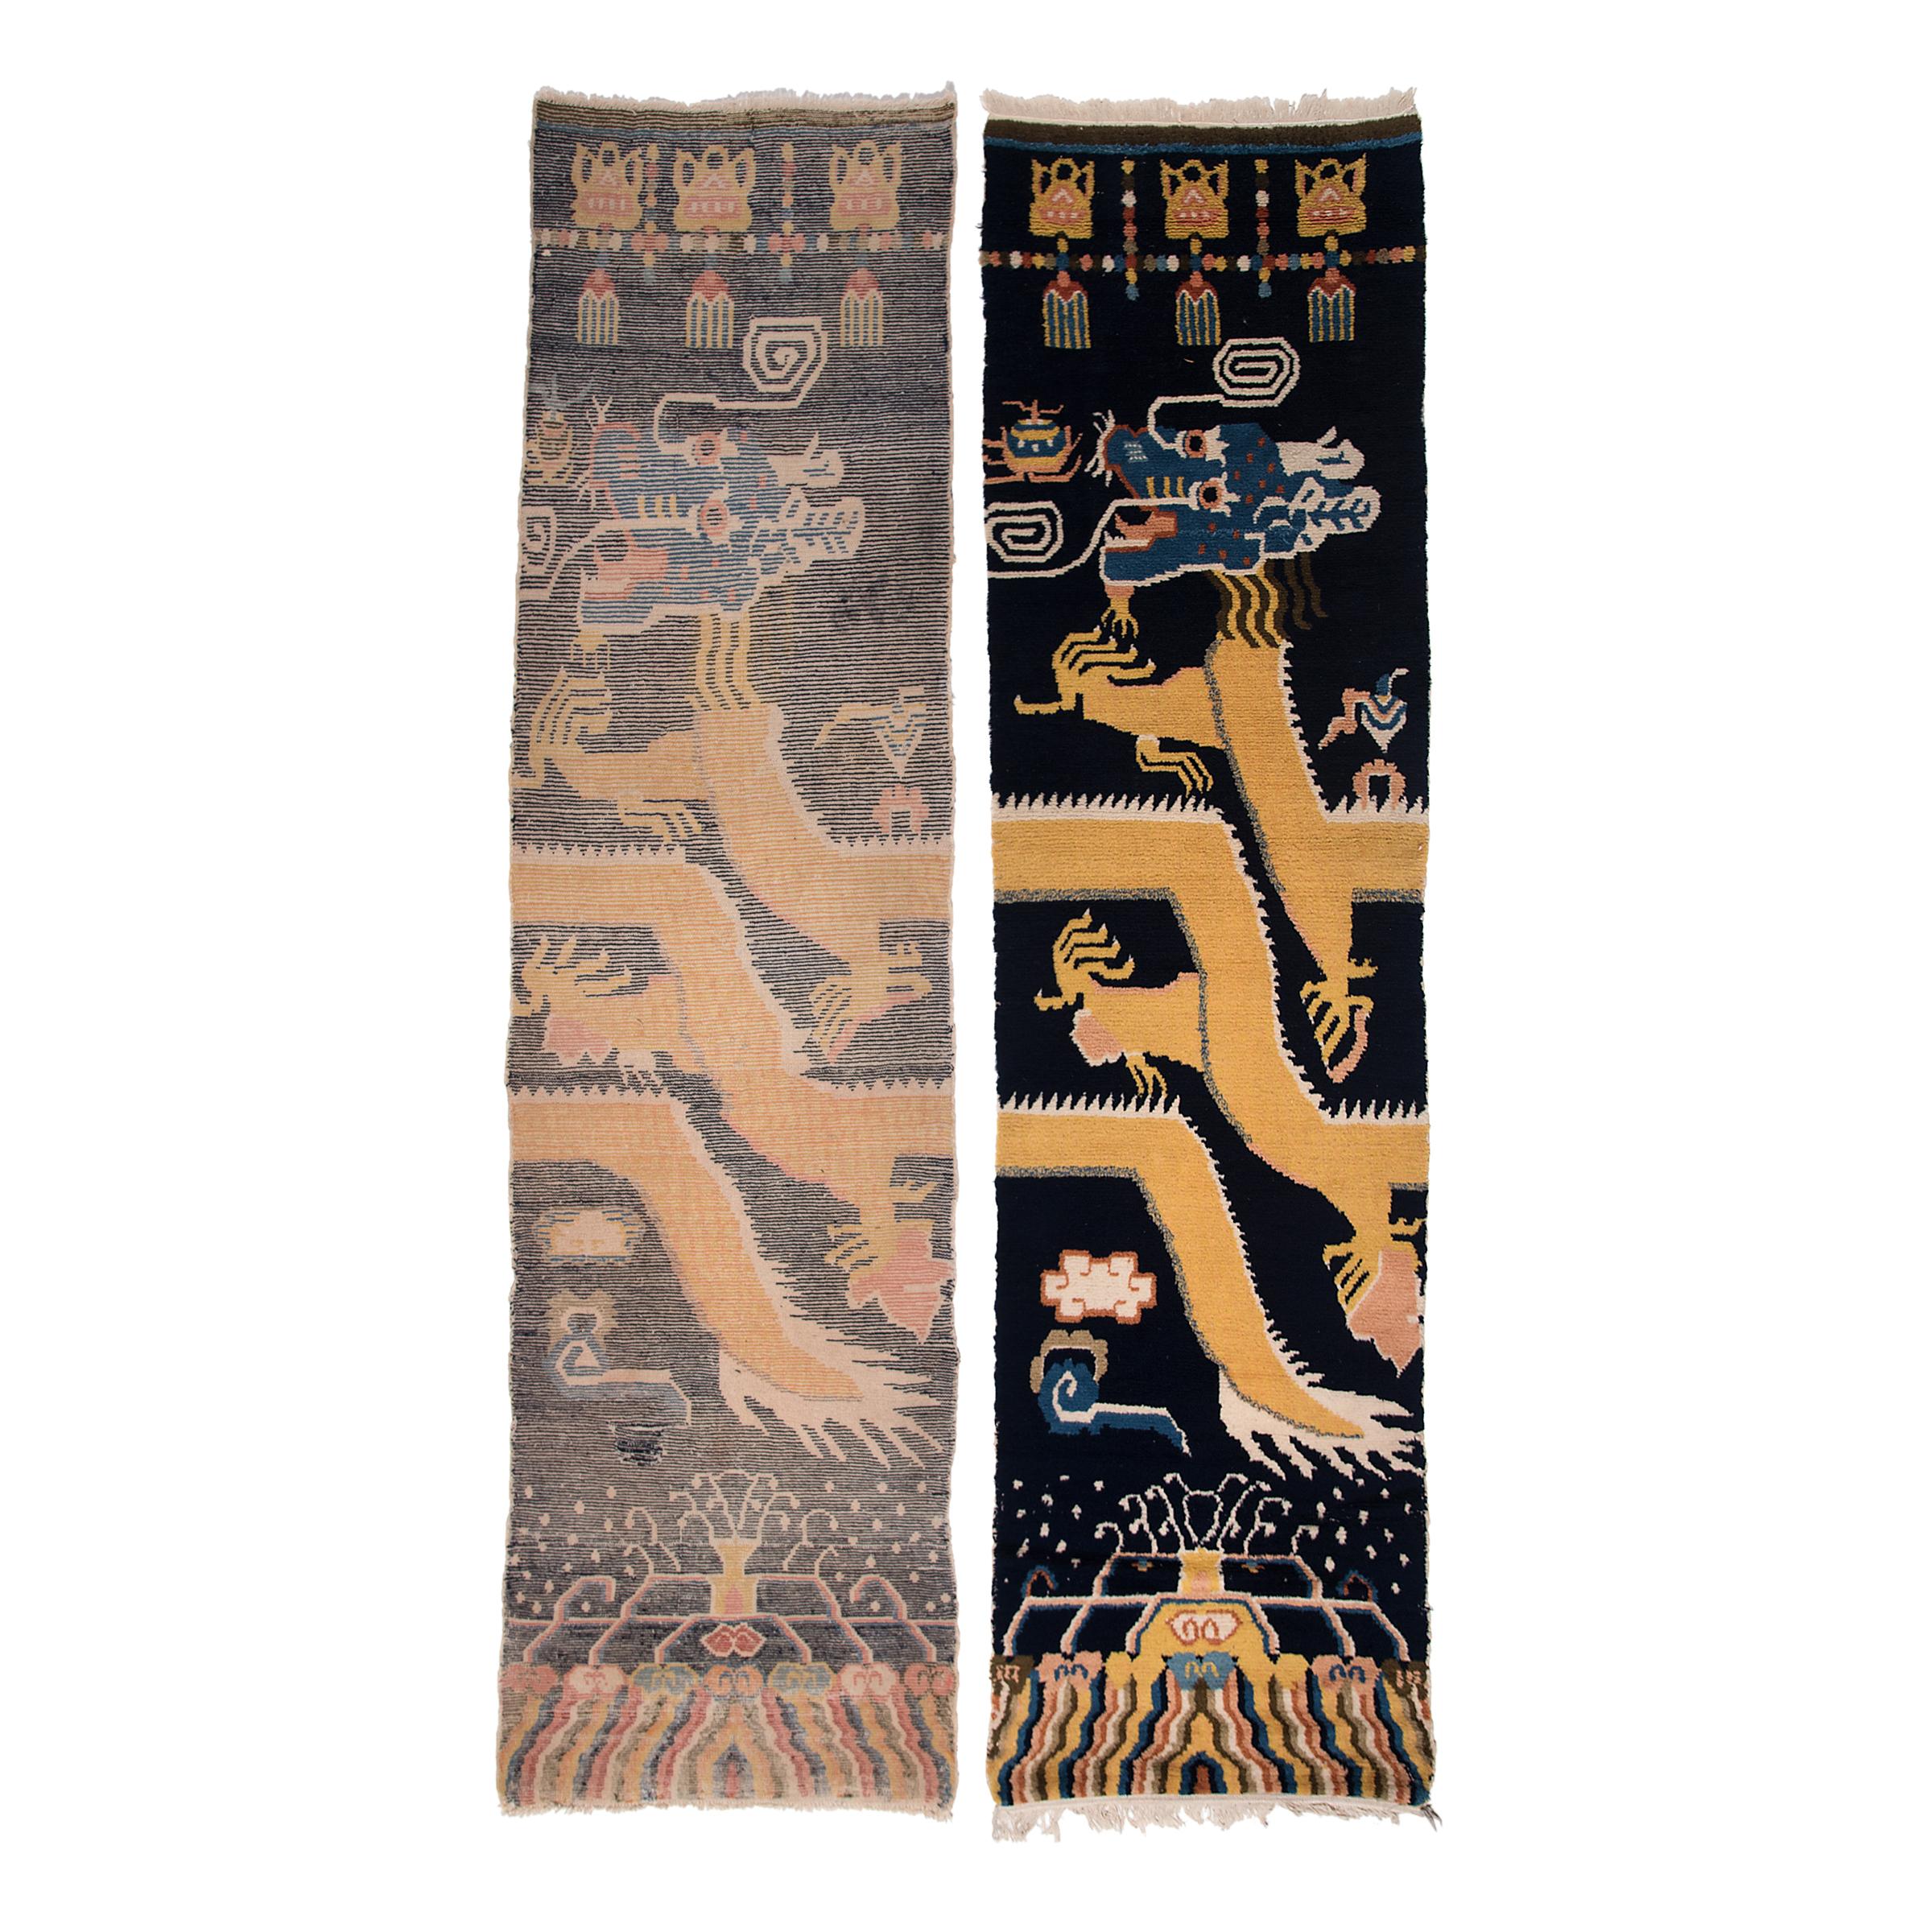 Historically used within Buddhist prayer halls, these long Tibetan carpets were once wrapped around structural columns to adorn and insulate the interior. Intended to be hung on either side of a column, these carpets are designed in complement to